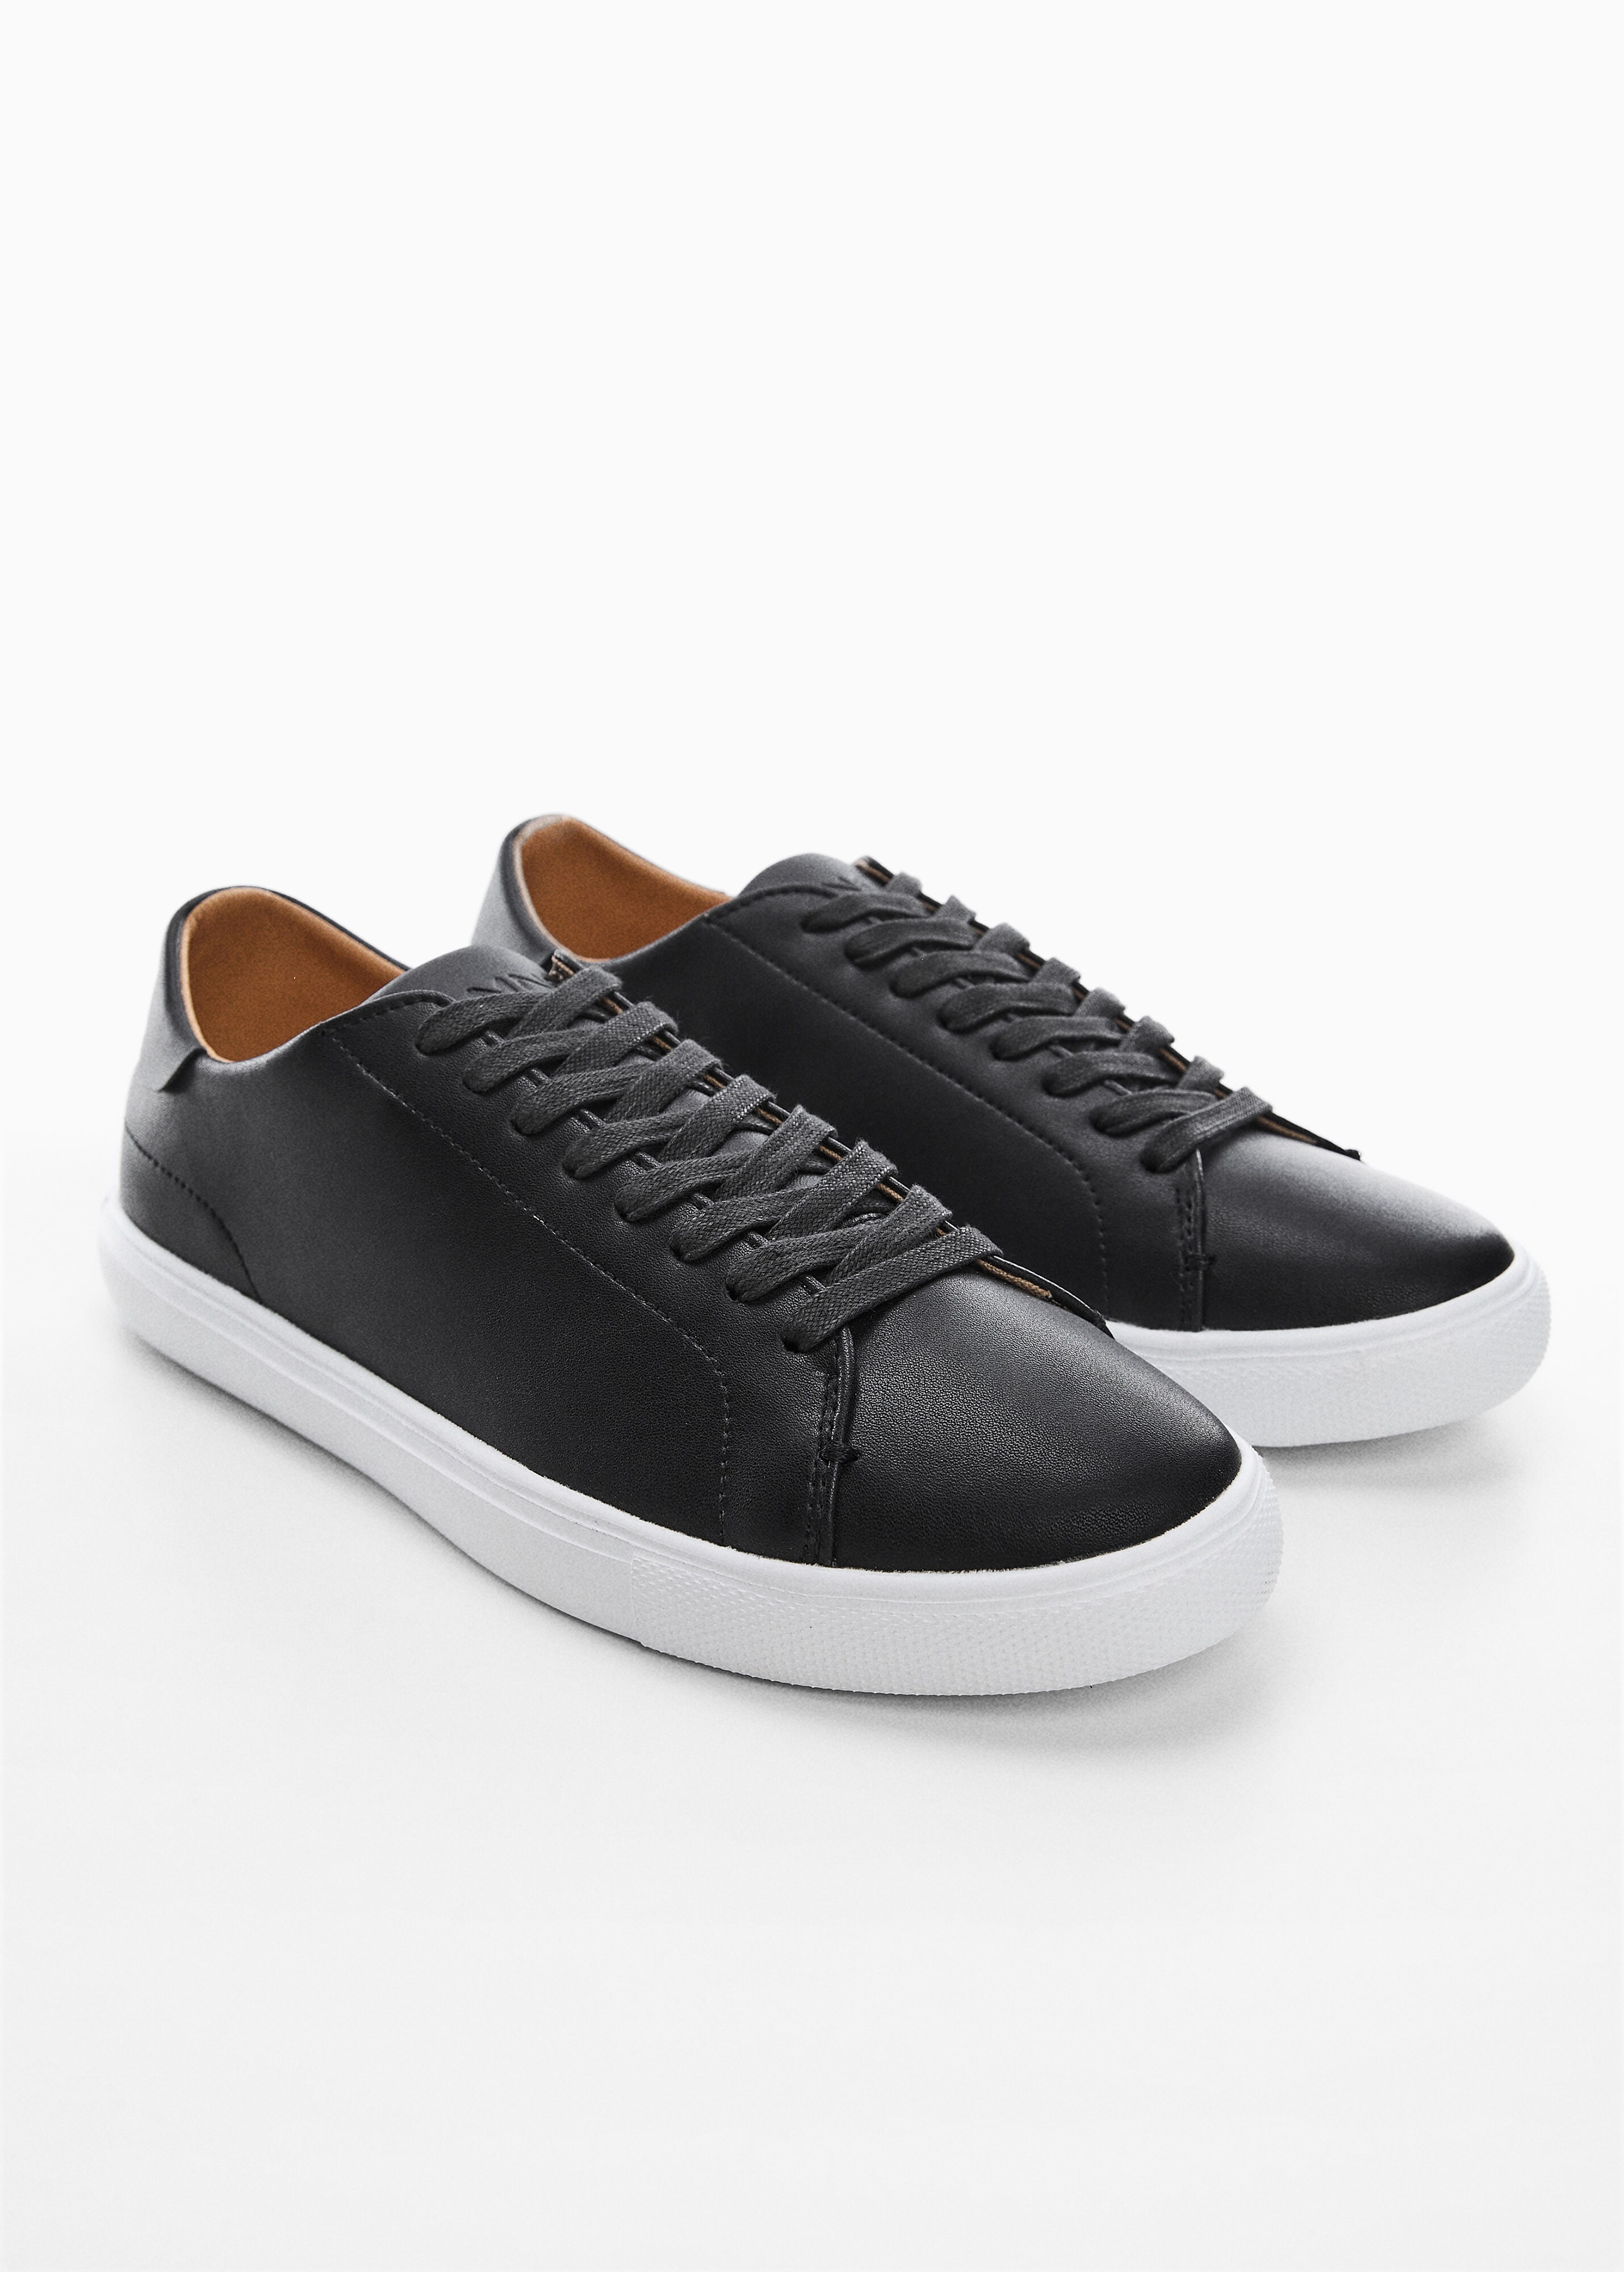 Noncolored leather sneakers - Medium plane